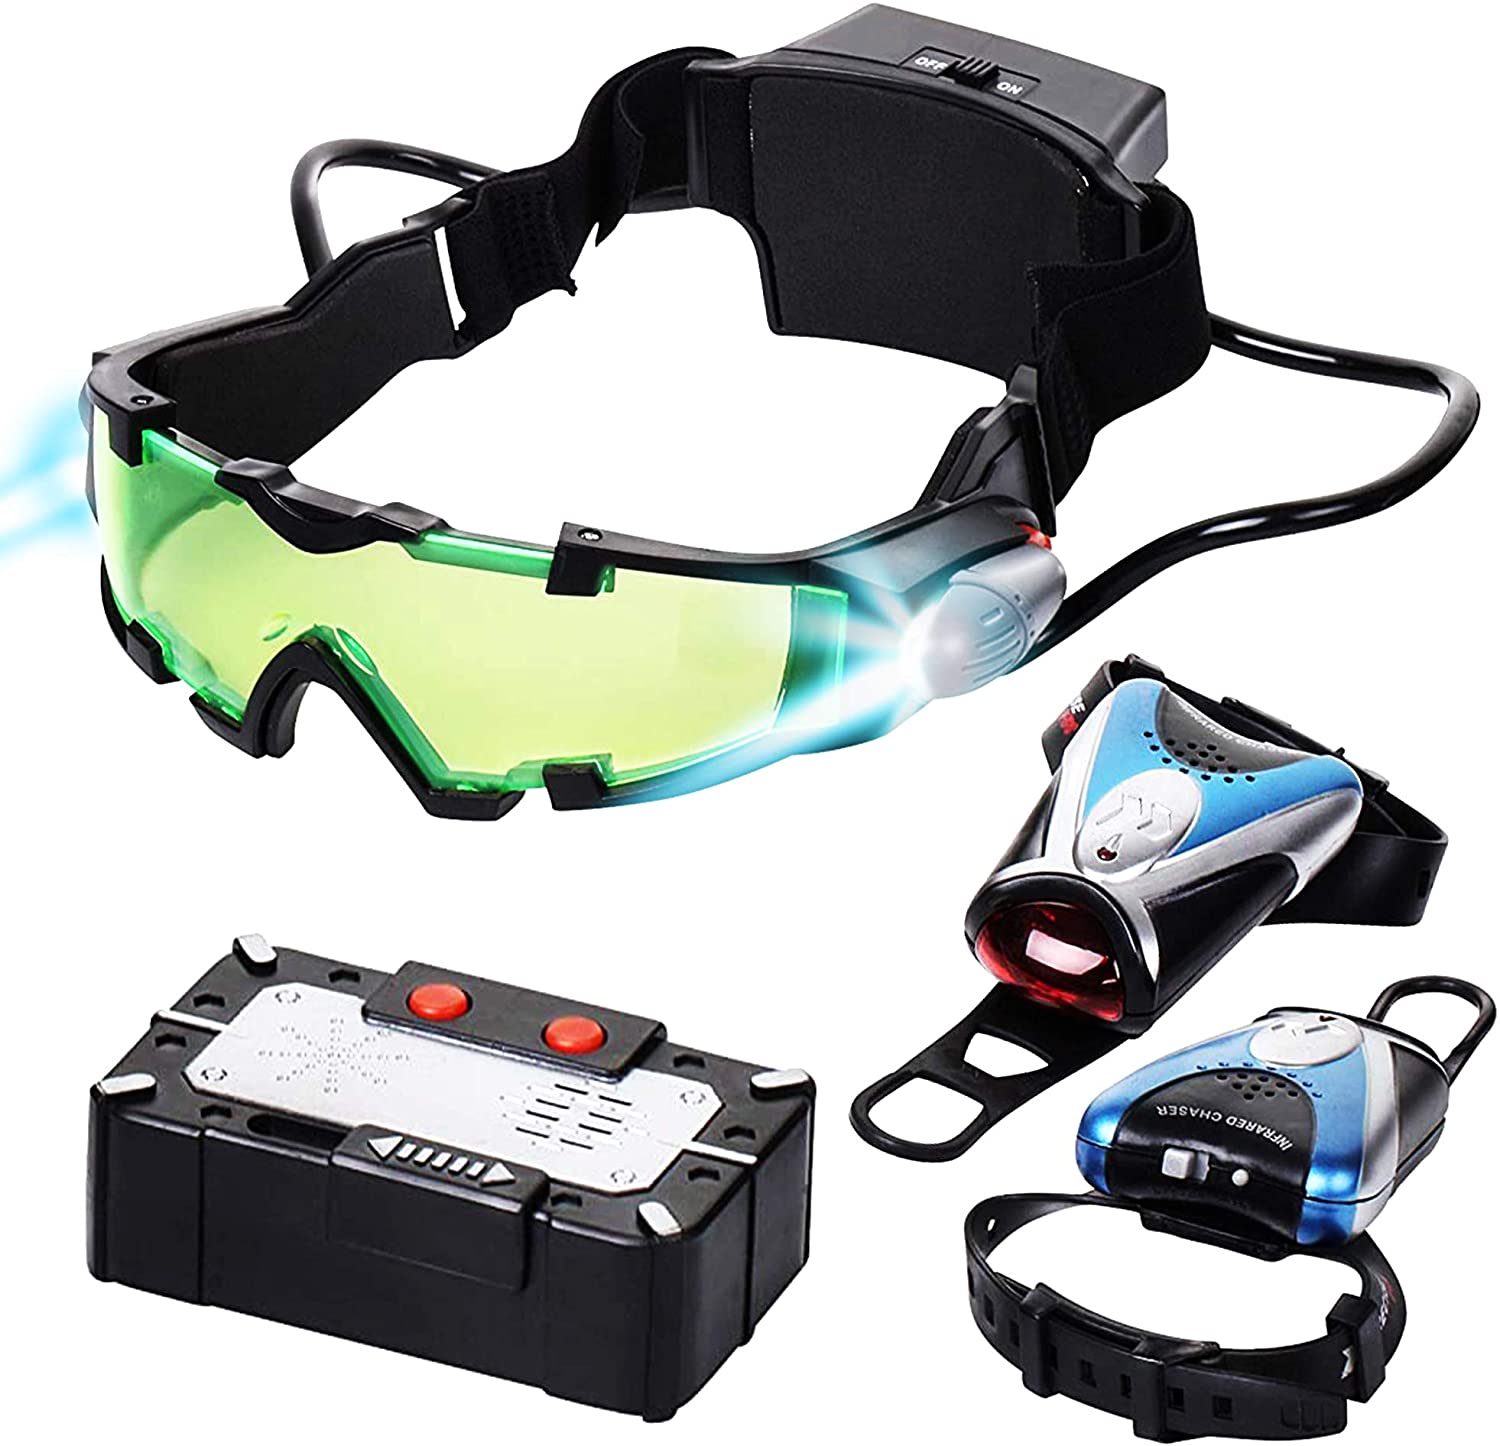 Spy Set - Night Vision Goggles, Voice Disguiser, IR Chaser